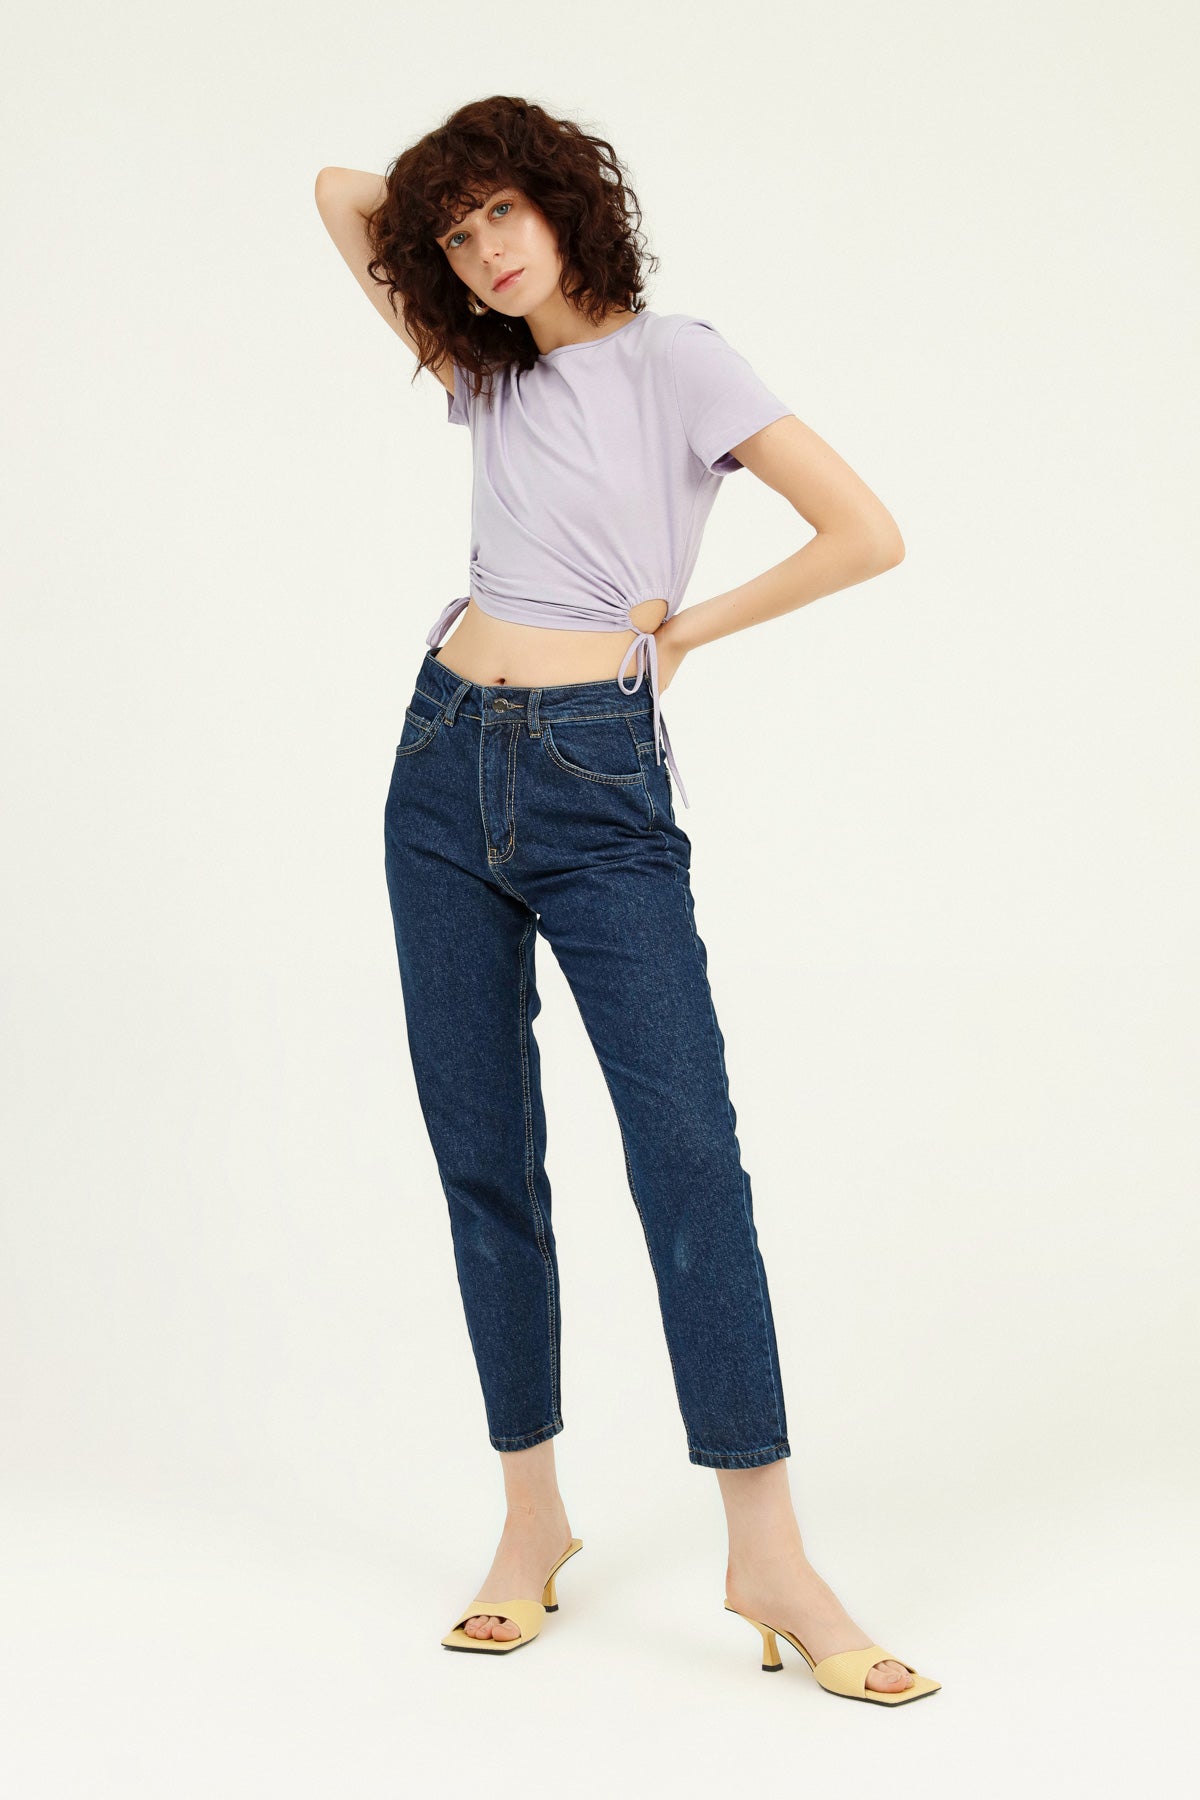 Pleated Decollete T-Shirt Lilac